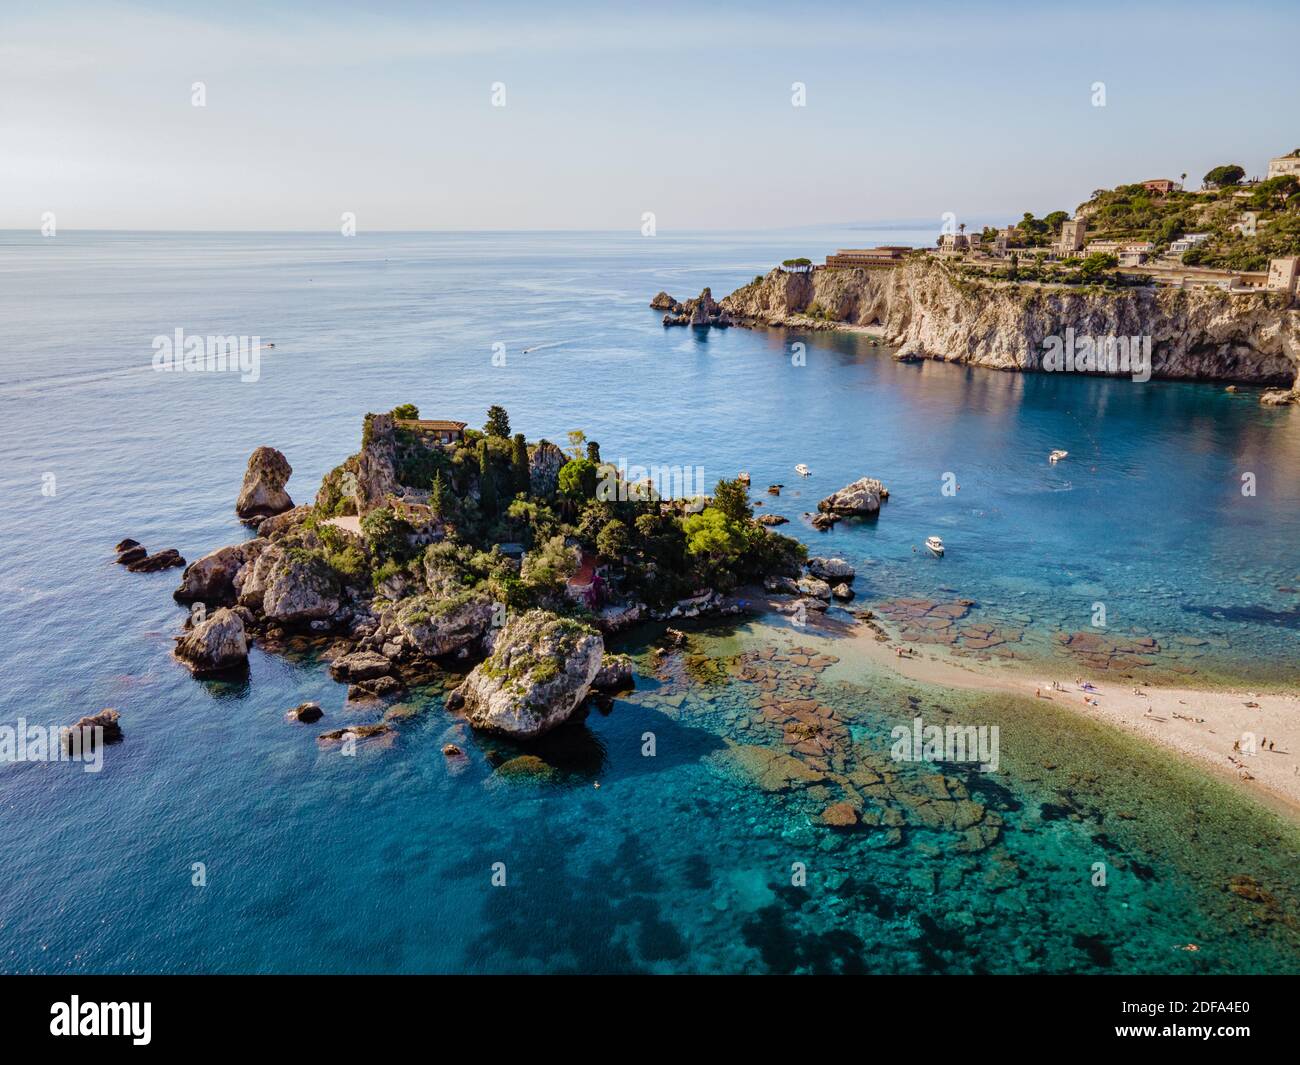 Isola Bella at Taormina, Sicily, Aerial view of the island and Isola Bella beach and blue ocean water in Taormina, Sicily, Italy Europe Stock Photo